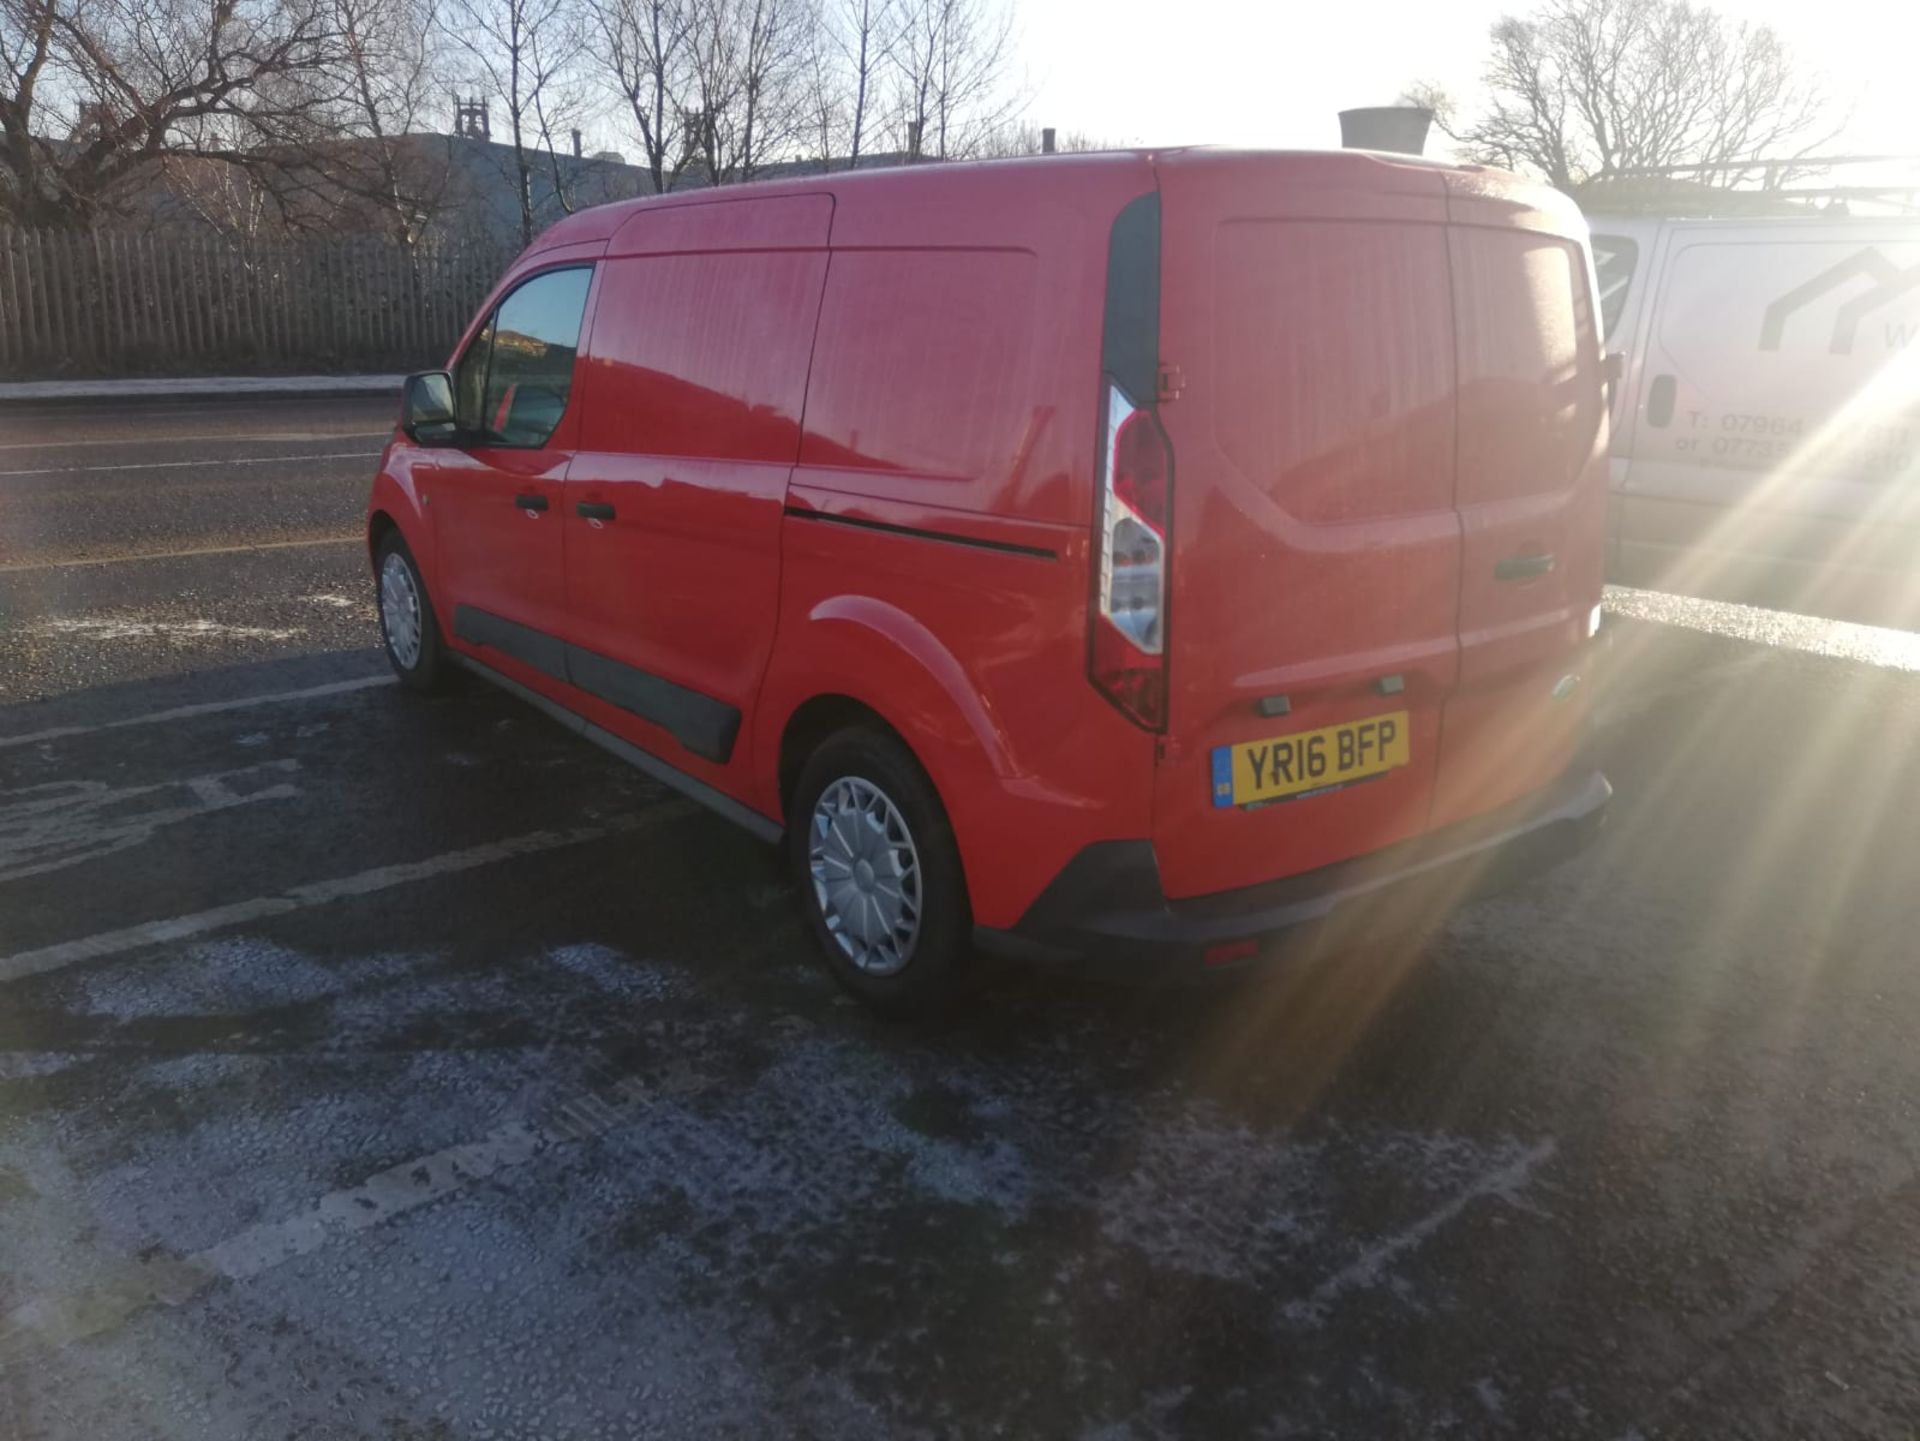 2016 16 ford Transit connect Lwb Red Panel van - Full service history - air con - YR16 BFP - Image 5 of 10